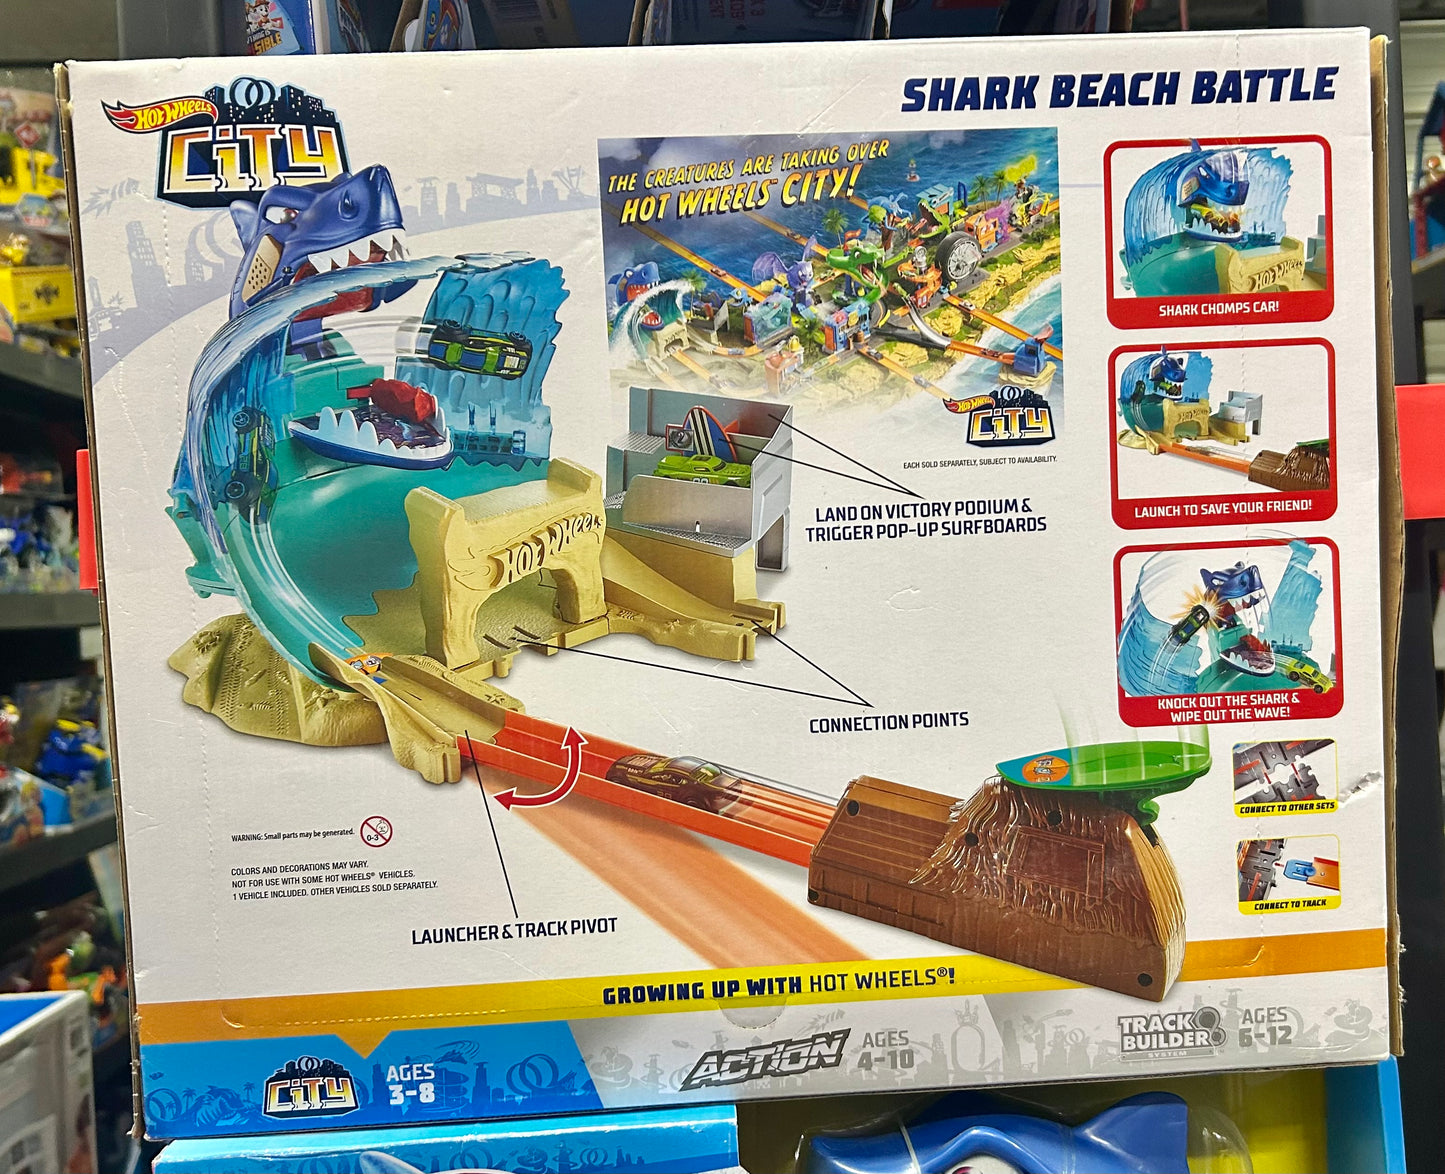 Hot Wheels City Shark Beach Battle Playset with 1 Toy Car in 1:64 Scale